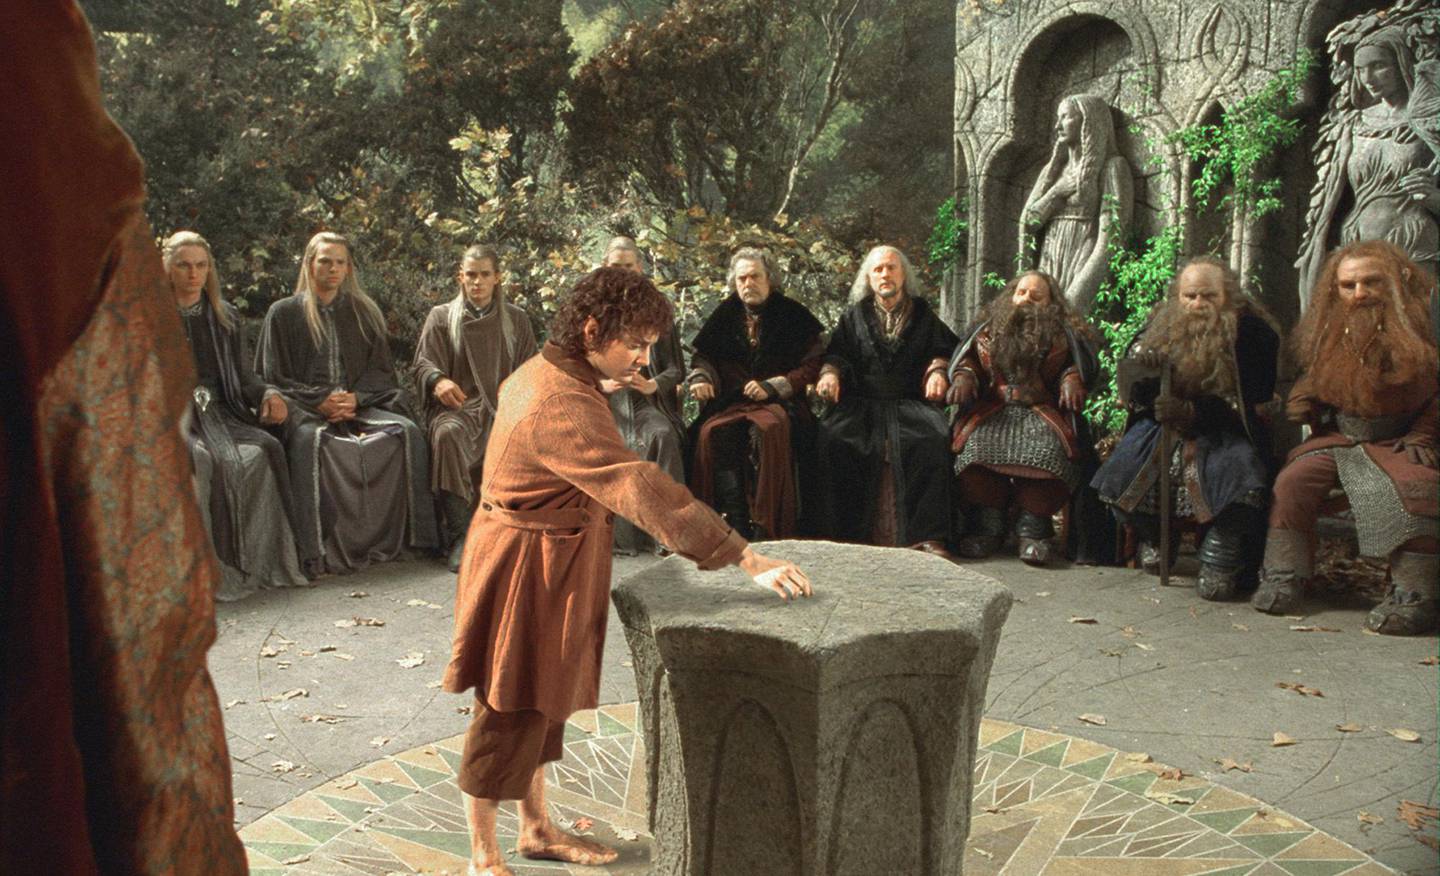 
TO GO WITH STORY TITLED OSCAR OUTLOOK--Actor Elijah Wood, center, as Frodo, addresses the Council of Elrond about the fate of Middle-Earth in this promotional photo for New Line Cinema's adventure movie, "The Lord of the Rings: The Fellowship of the Ring." The first part of J.R.R. Tolkien's fantasy trilogy has gained acclaim as a serious candidate for an Oscar. (AP Photo/New Line Cinema)